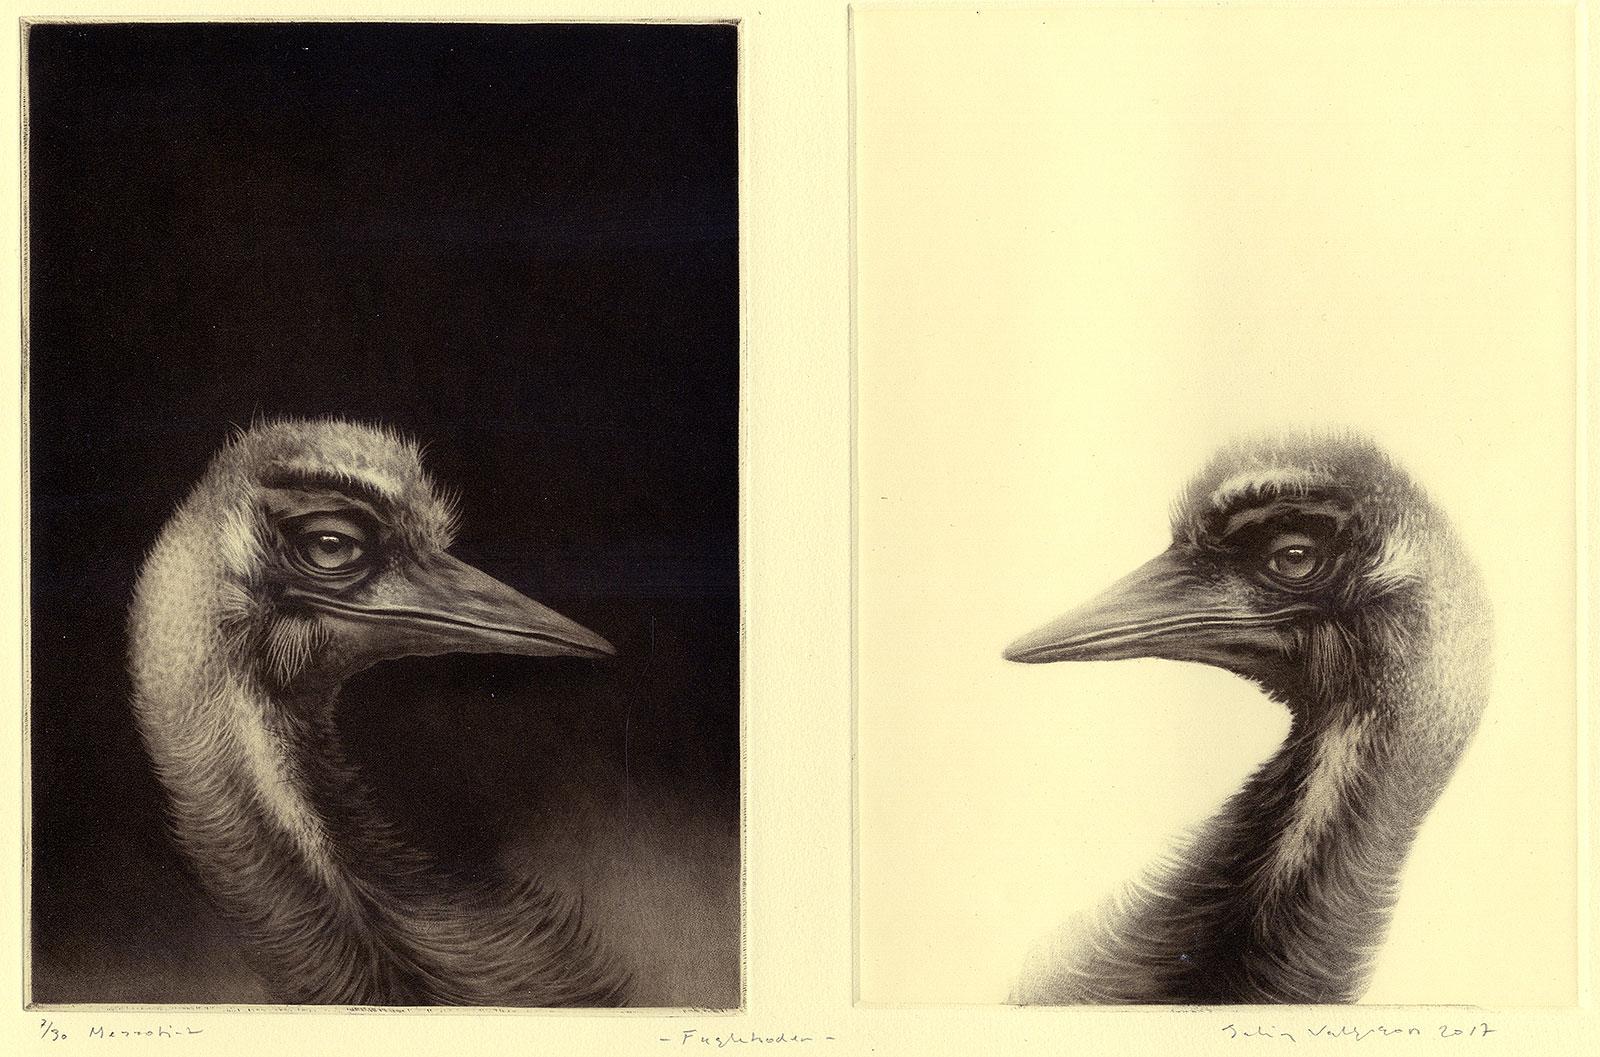 Birdheads (two beaked birds facing off) - Yellow Animal Print by Erling Valtyrson